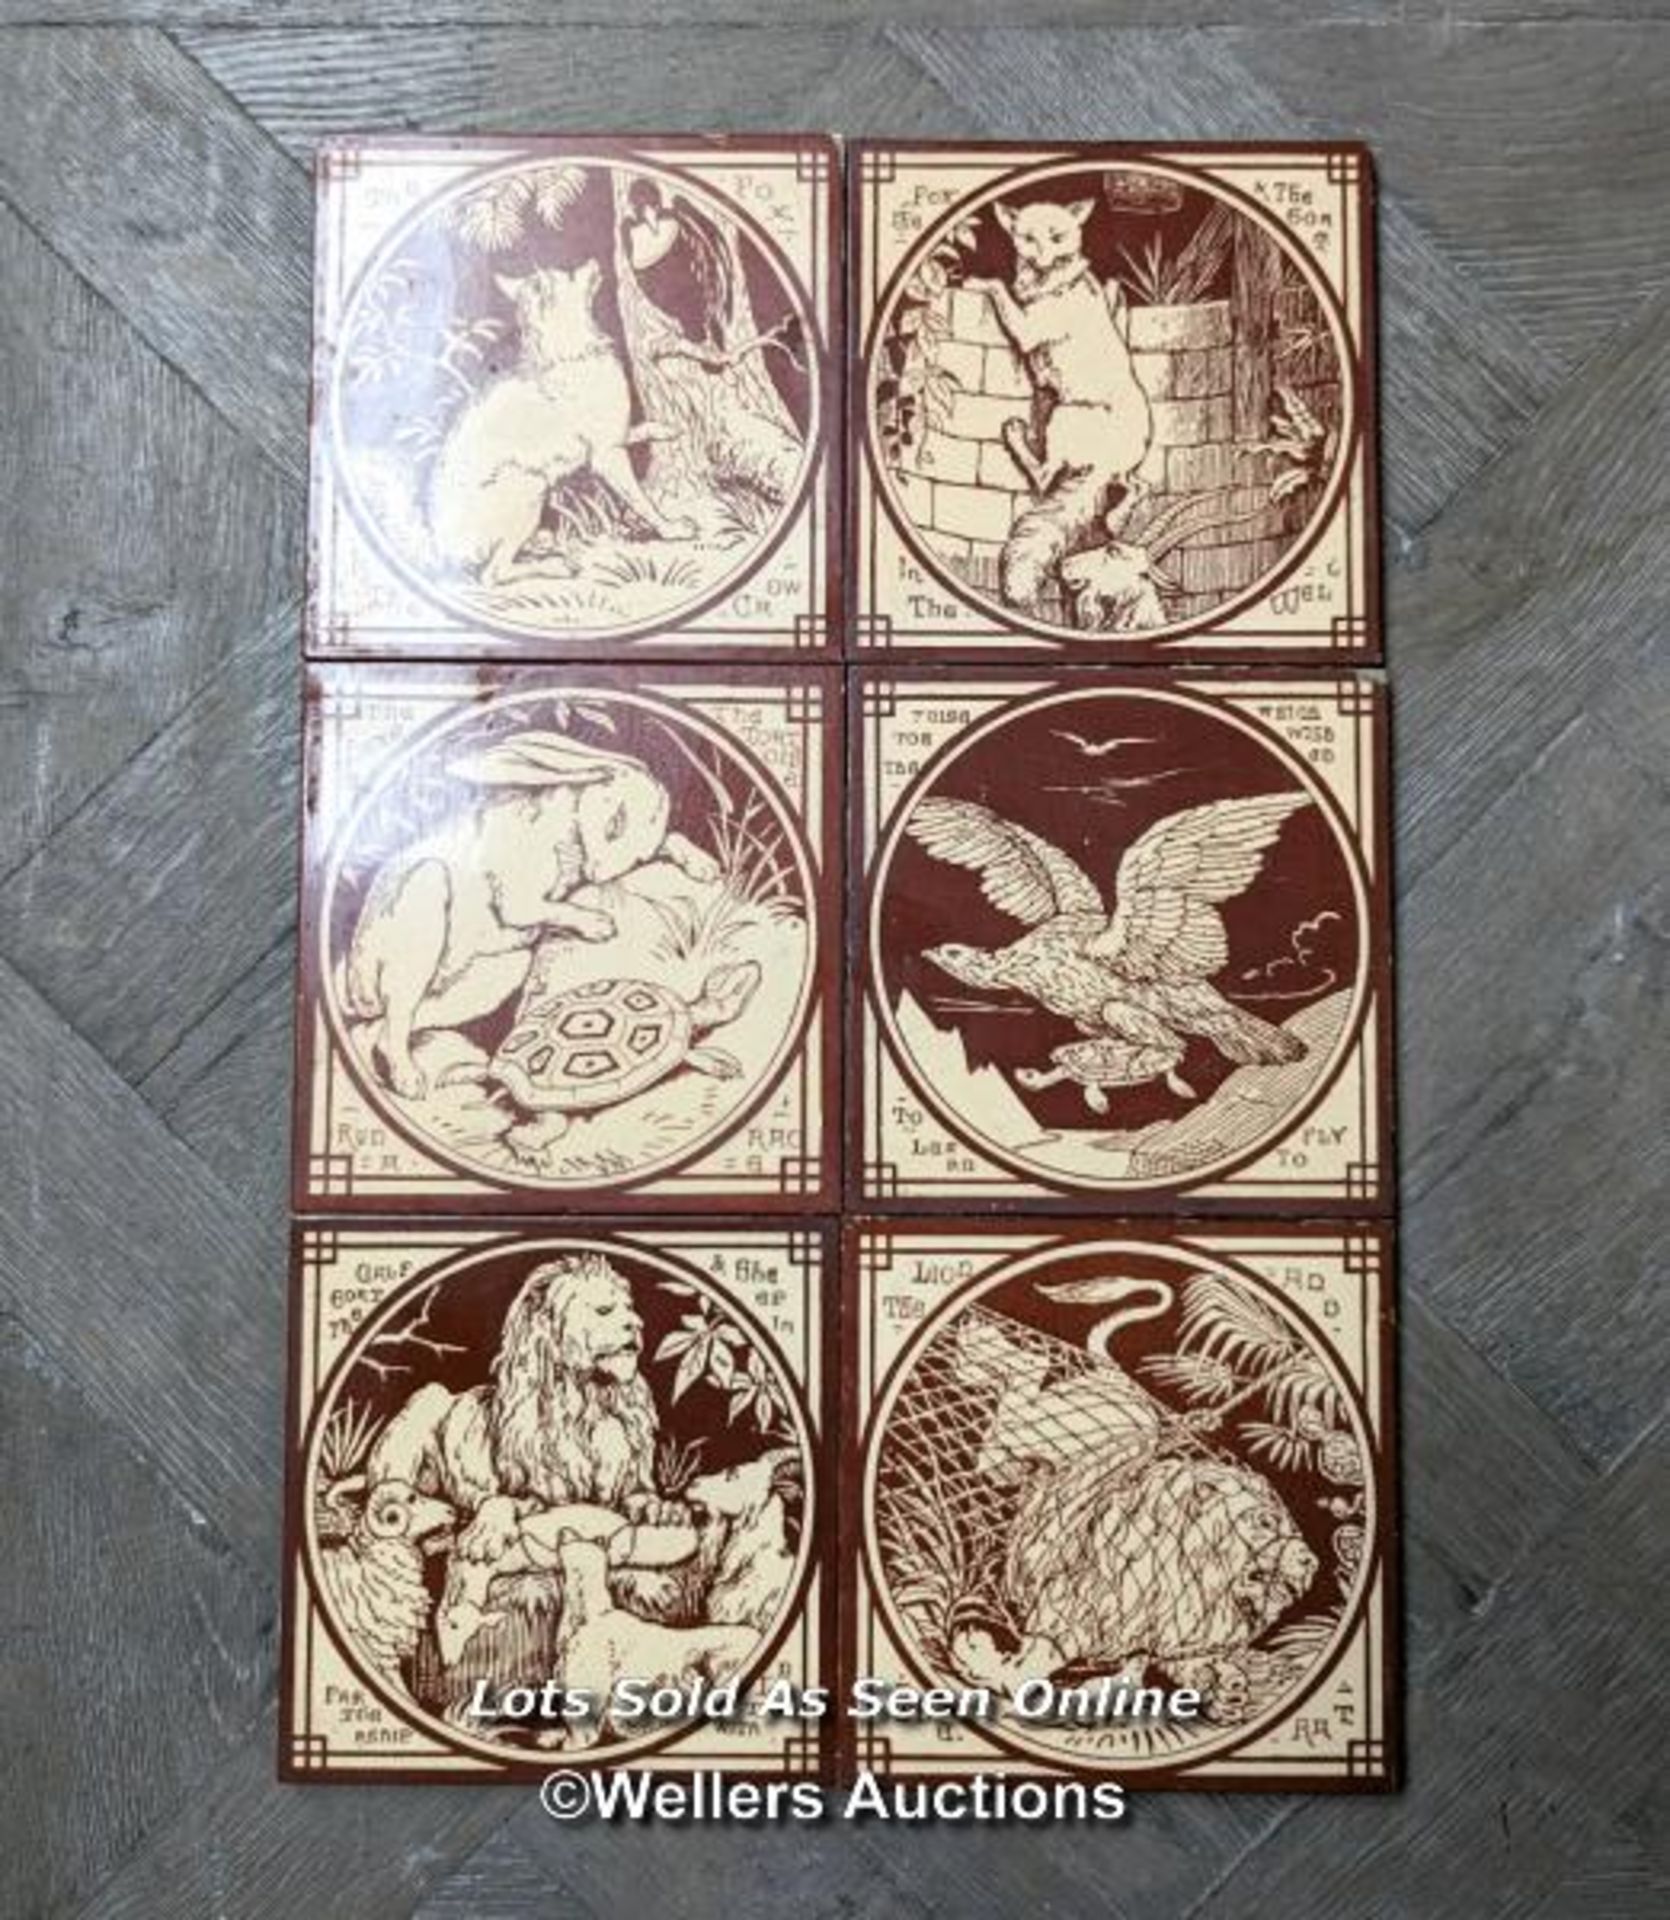 Set of 6 Minton aesop's fables tiles. Possibly designed by J Moyr Smith 1872 to 1875. 6" x 6". Small - Image 2 of 6